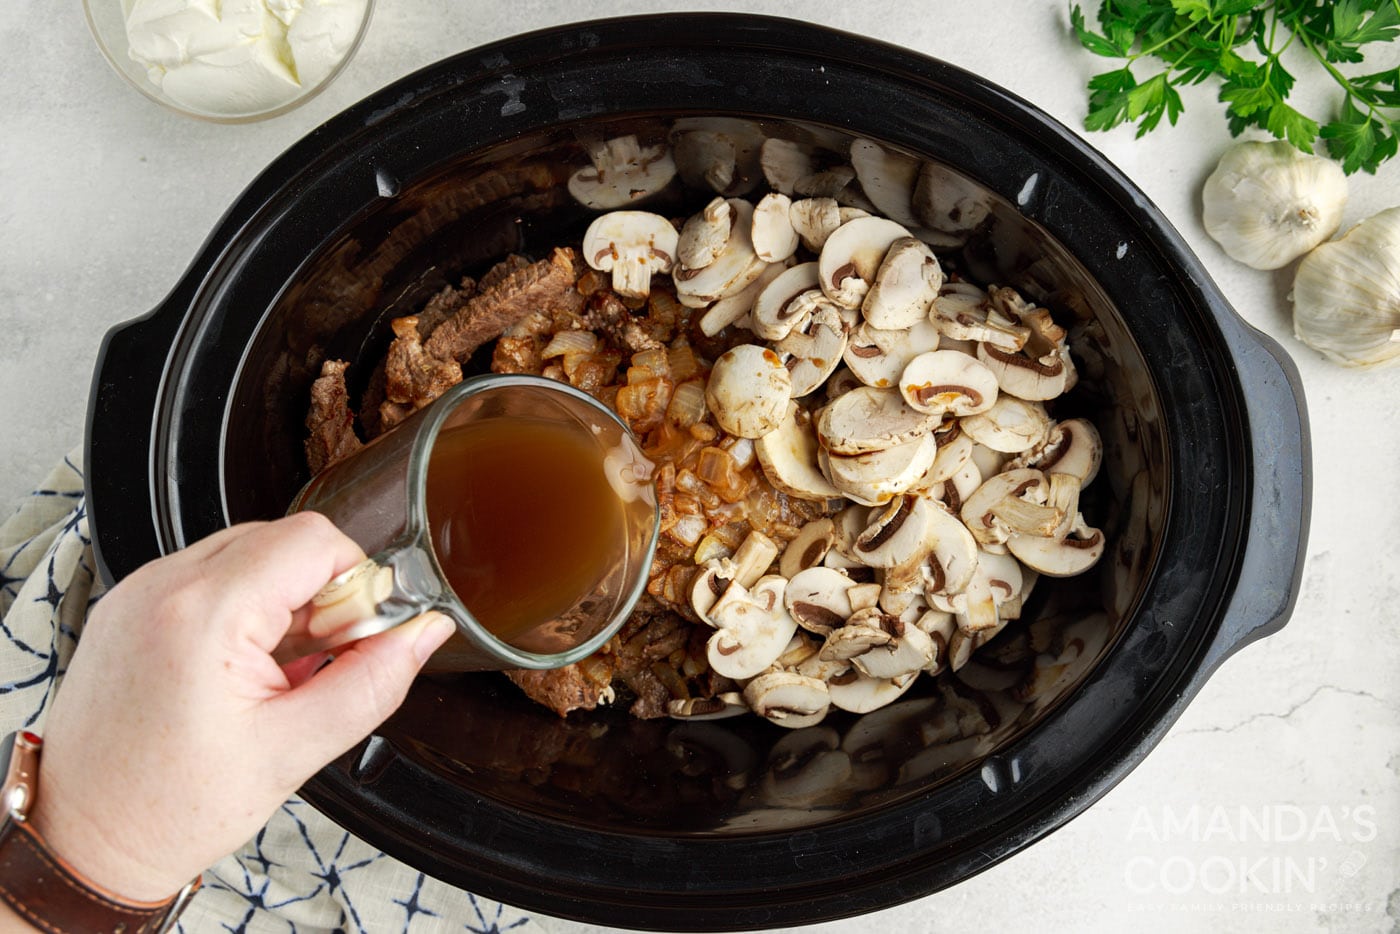 pouring beef stock into crockpot with mushrooms,, onions, and steak